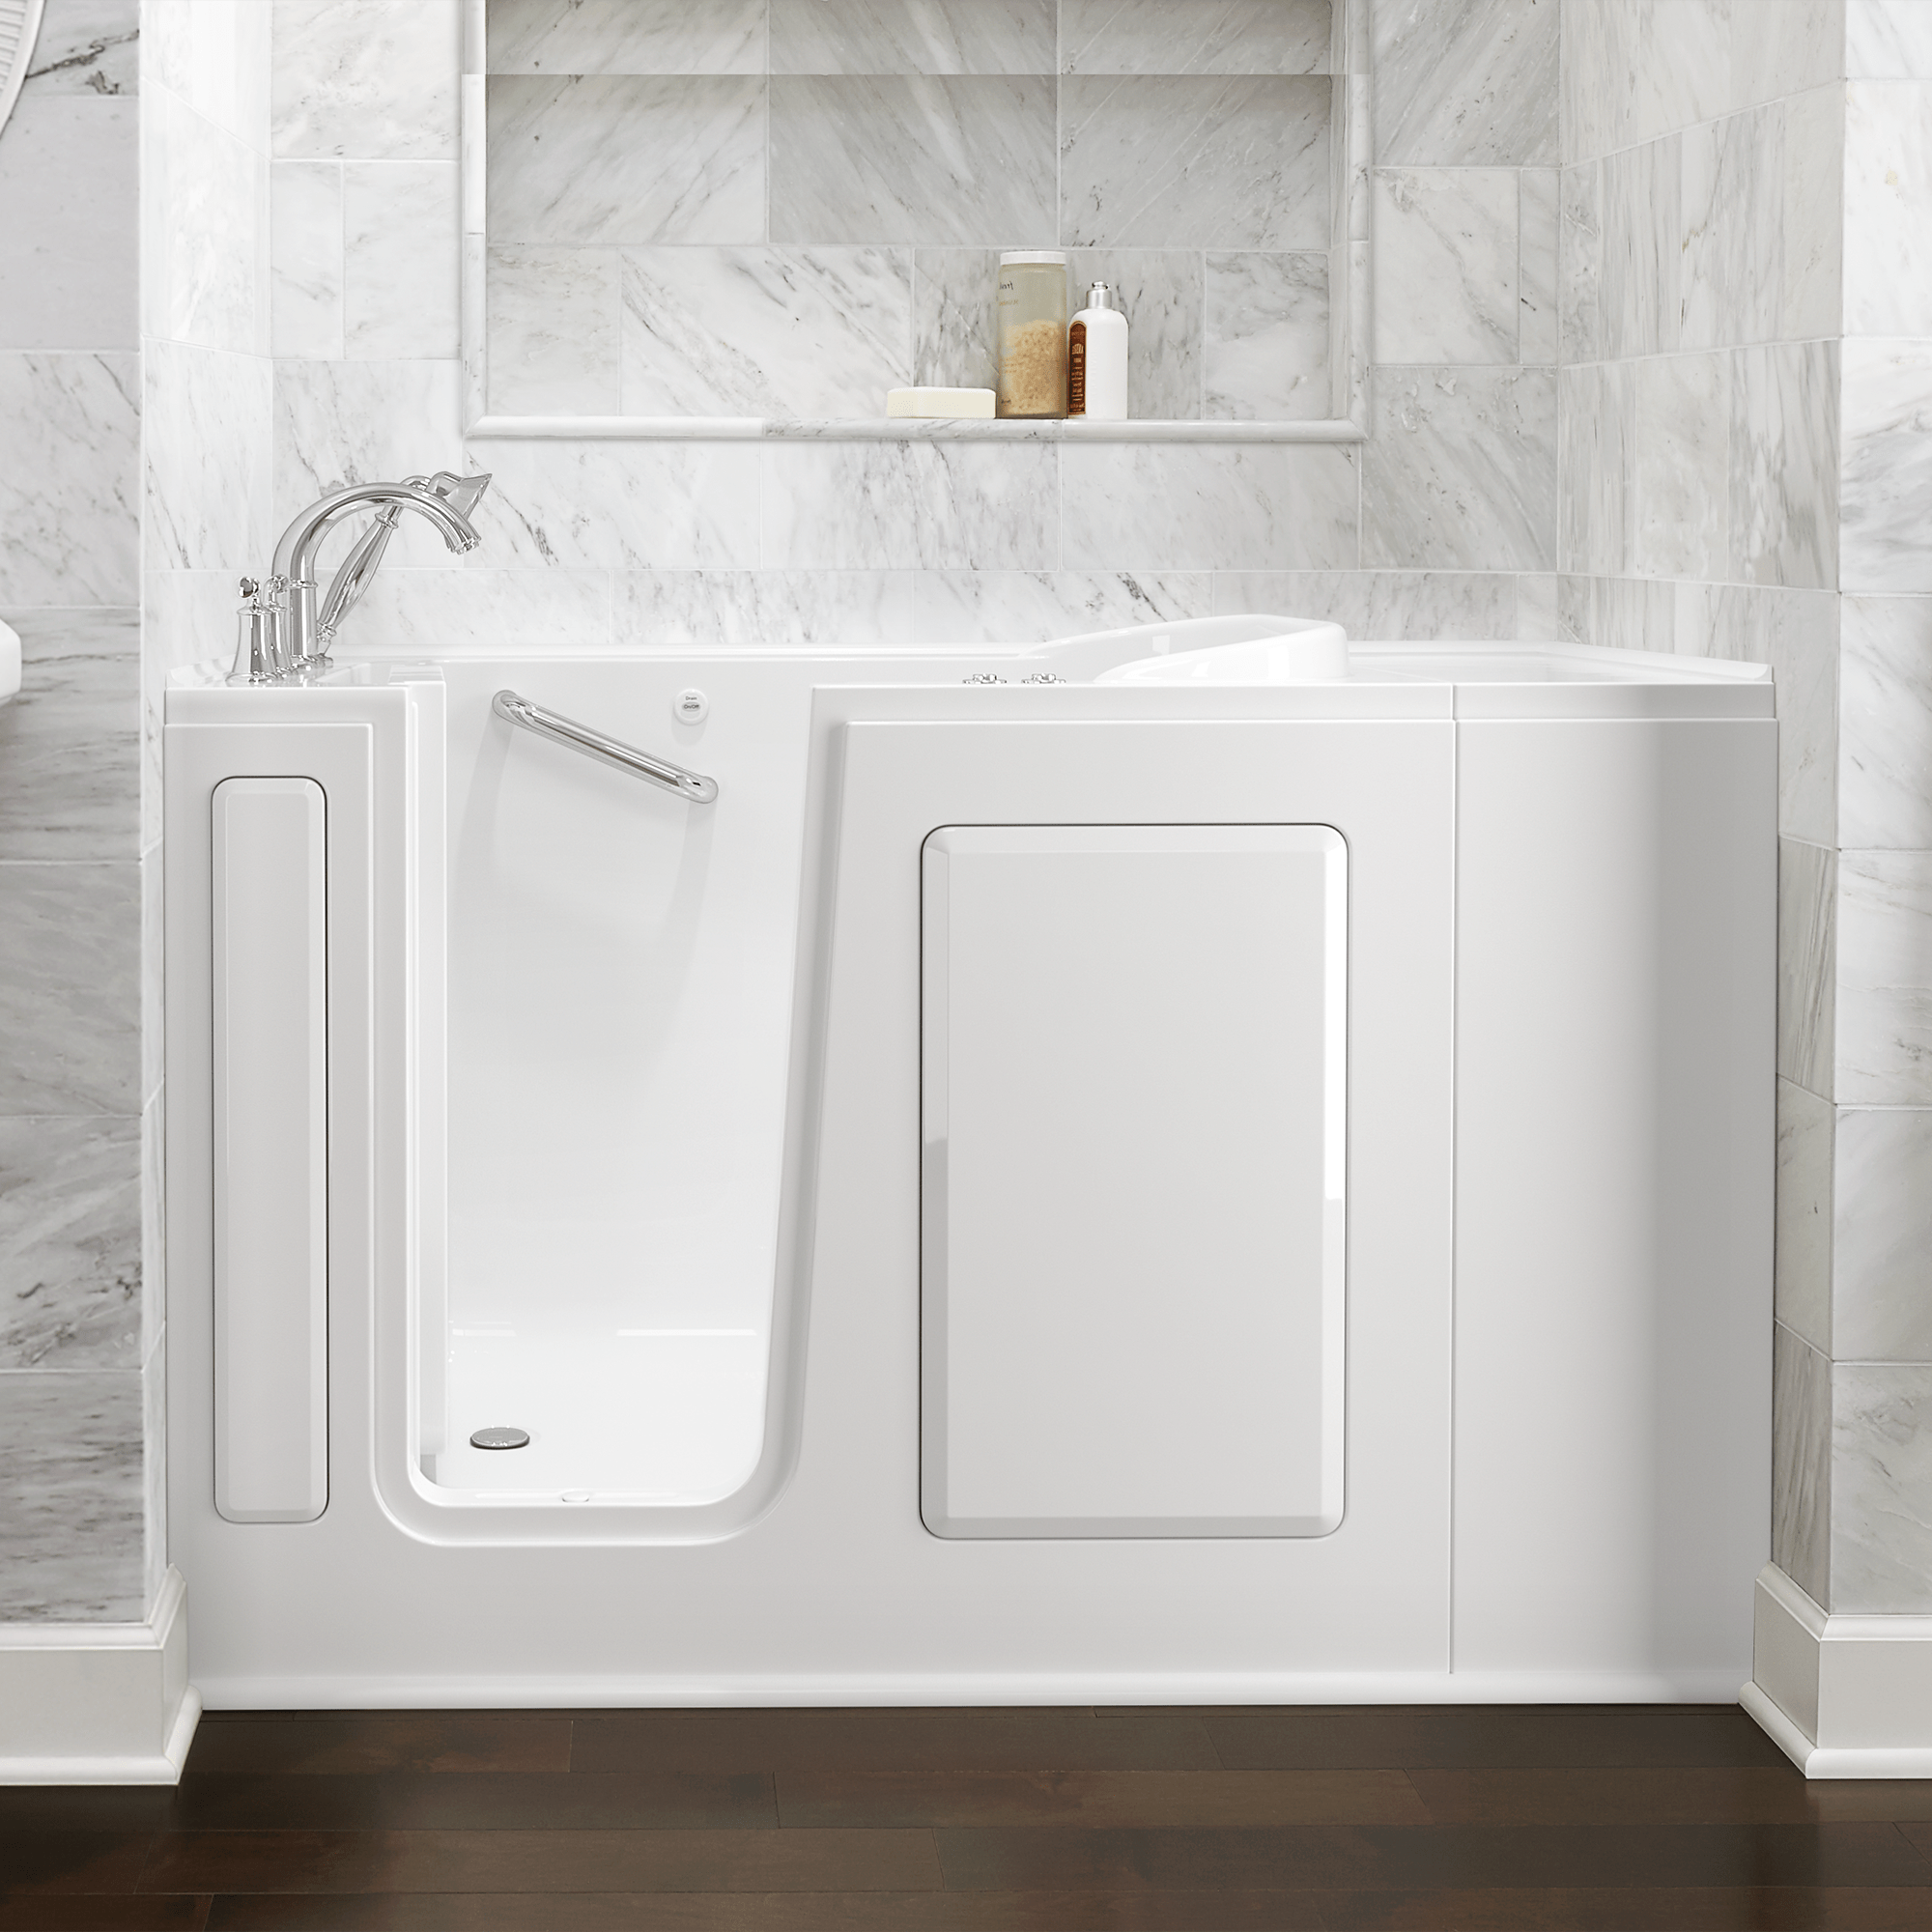 Gelcoat Value Series 28x48 Inch Walk in Bathtub with Combination Air Spa and Whirlpool Systems  Left Hand Door and Drain WIB WHITE